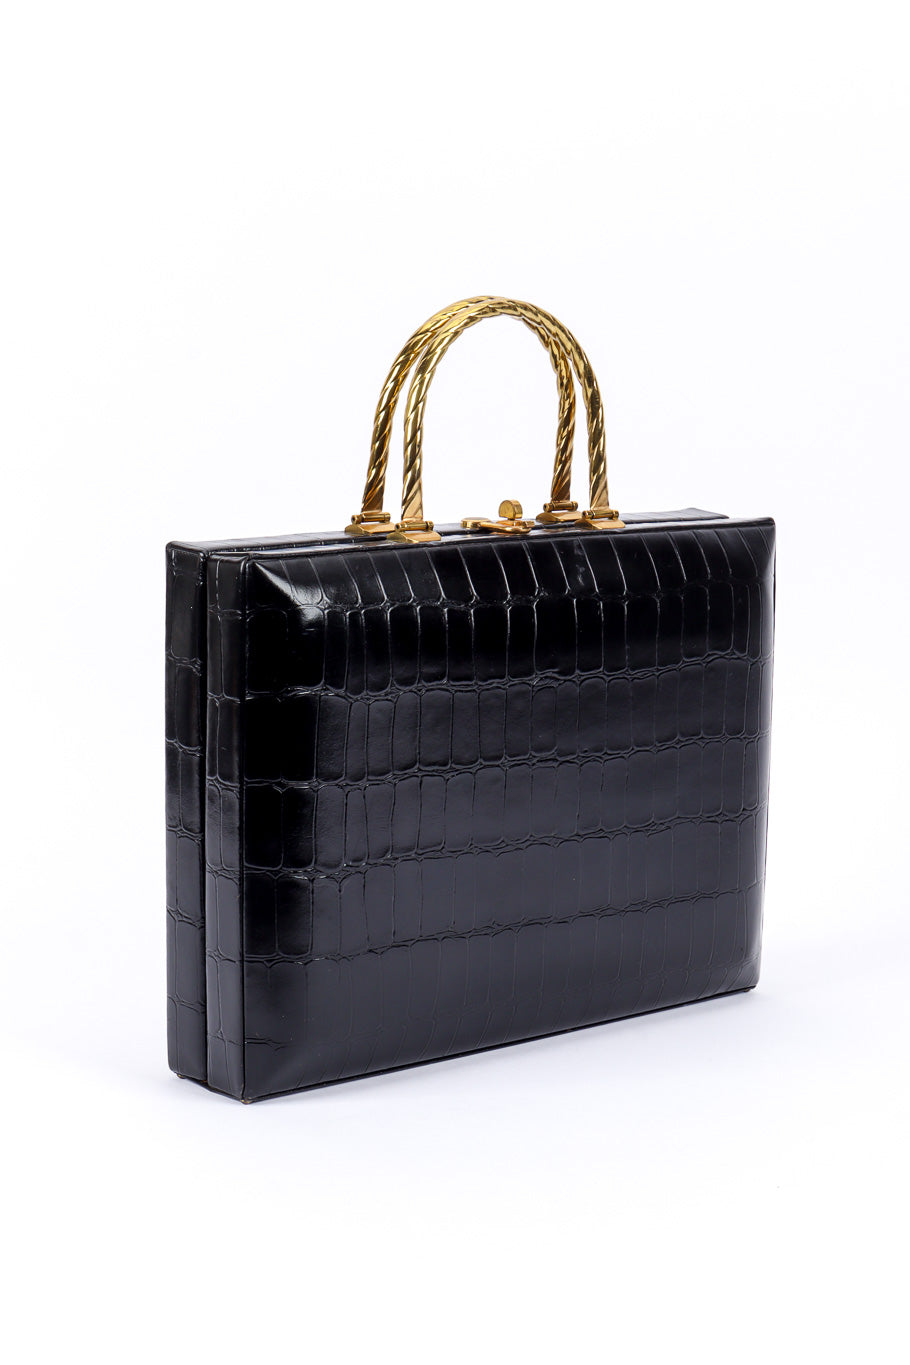 Reptile Zipperette Box Bag by Murray Kruger on white background angled to side @recessla